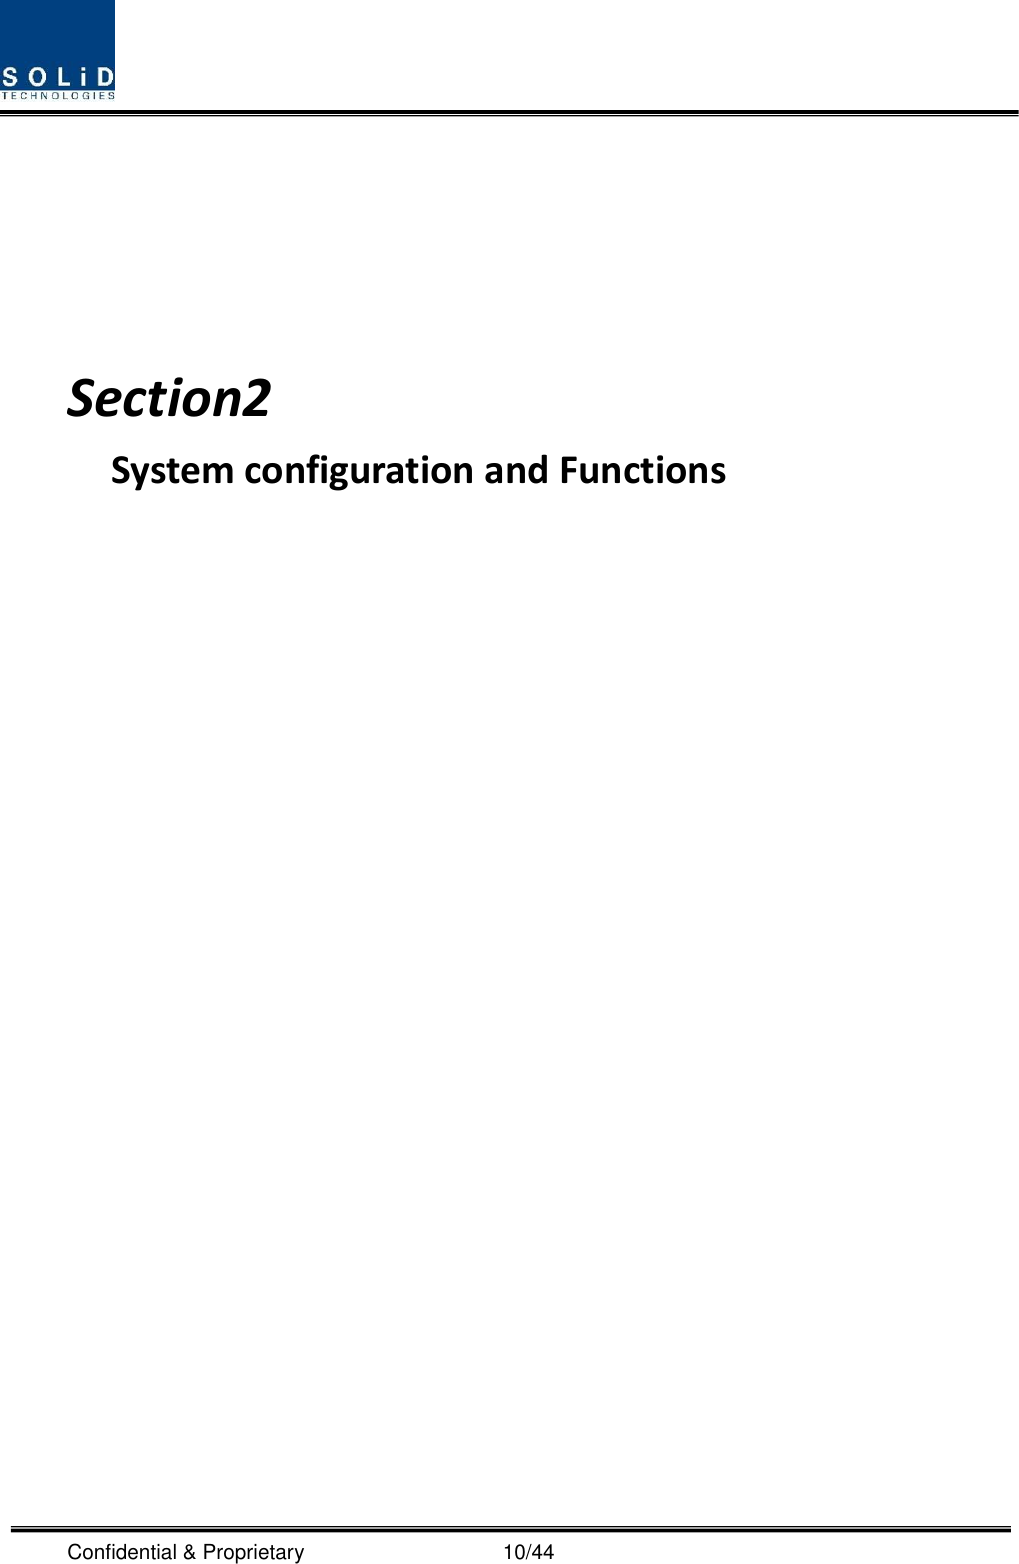  Confidential &amp; Proprietary                                      10/44    Section2                           System configuration and Functions                           